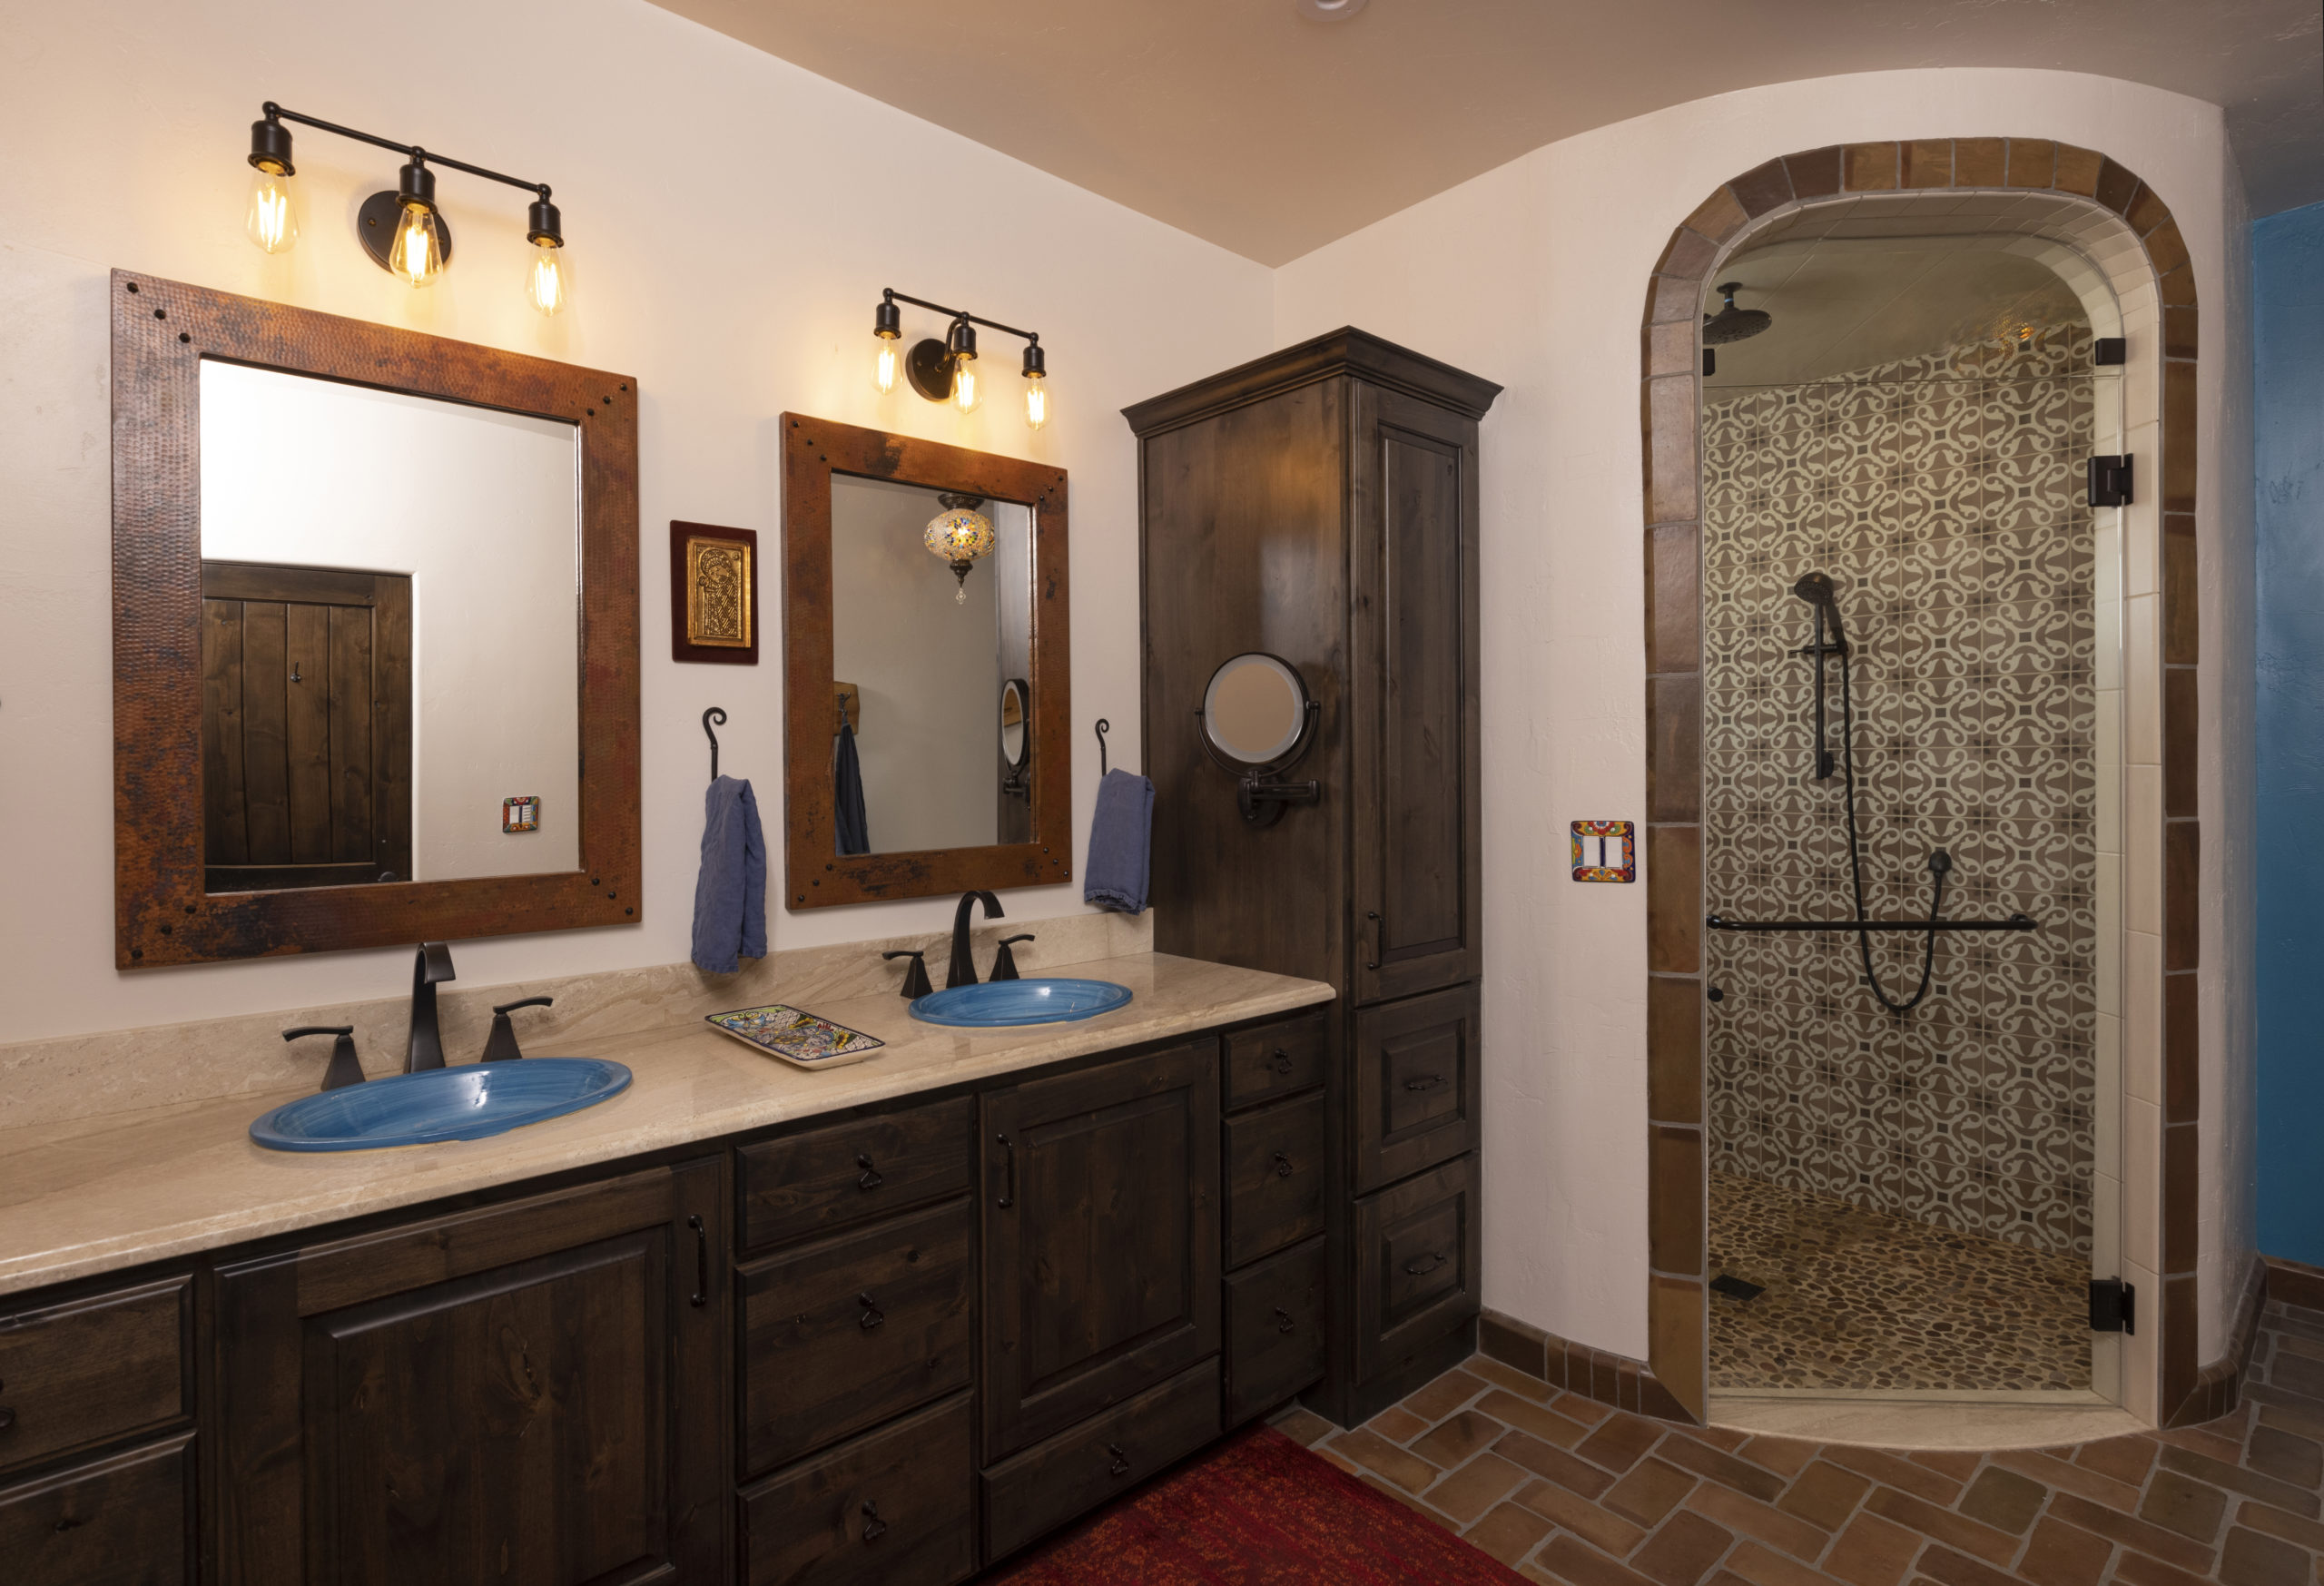 Primary bathroom with arched shower opening, steam shower and custom vanity